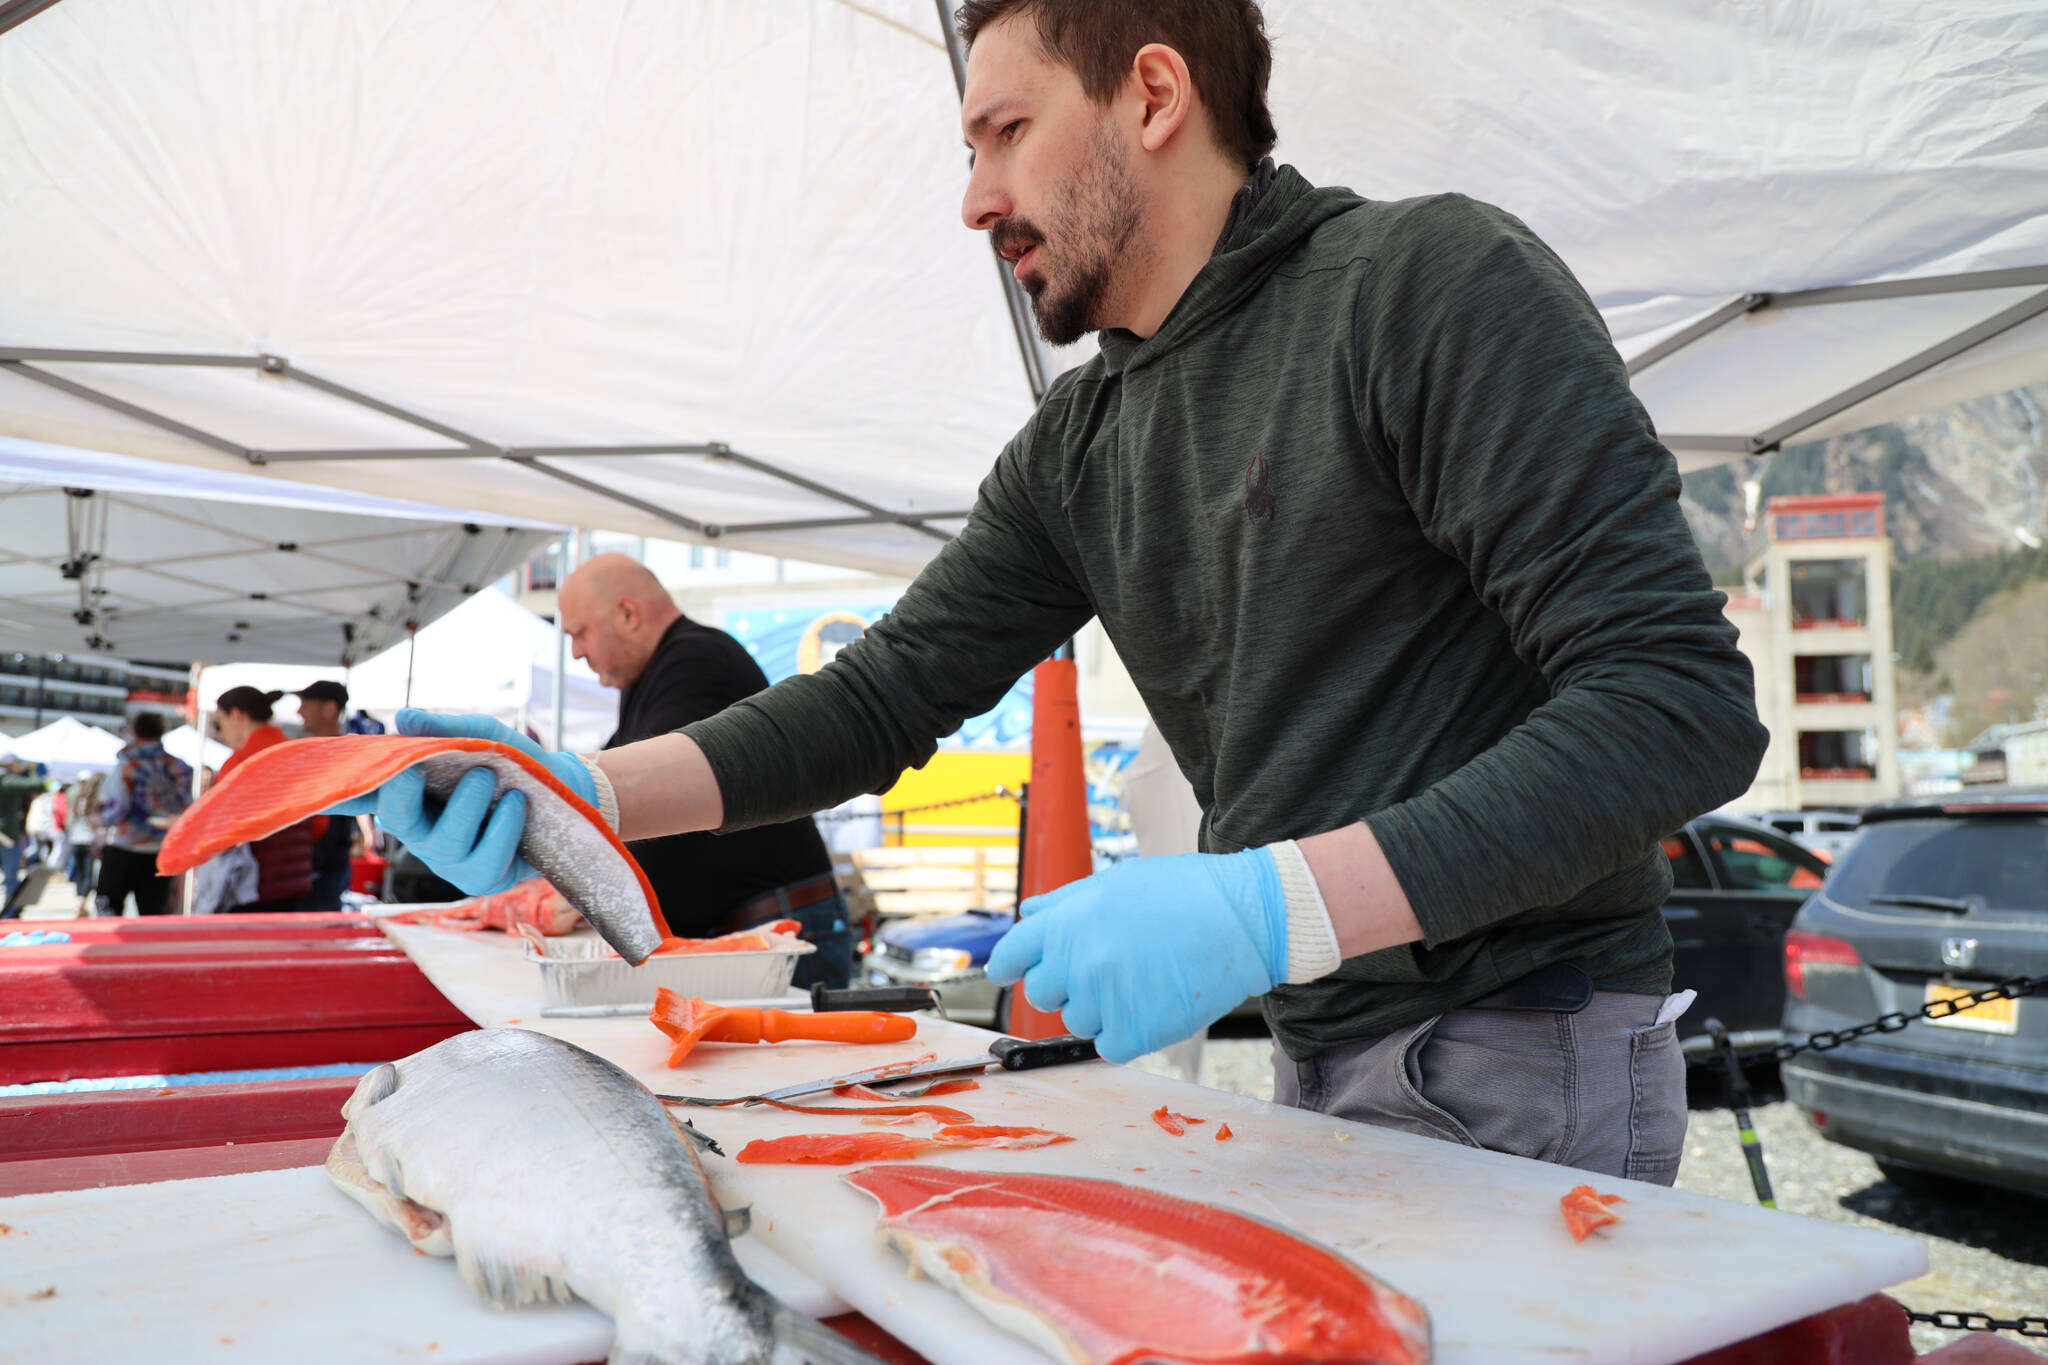 Jared Jerabek with Alaska Glacier Seafood fillets sockeye salmon to be cooked and handed out for free by Taku Smokeries during 2023 Juneau Maritime Festival Saturday afternoon at the Elizabeth Peratrovich Plaza. (Clarise Larson / Juneau Empire)